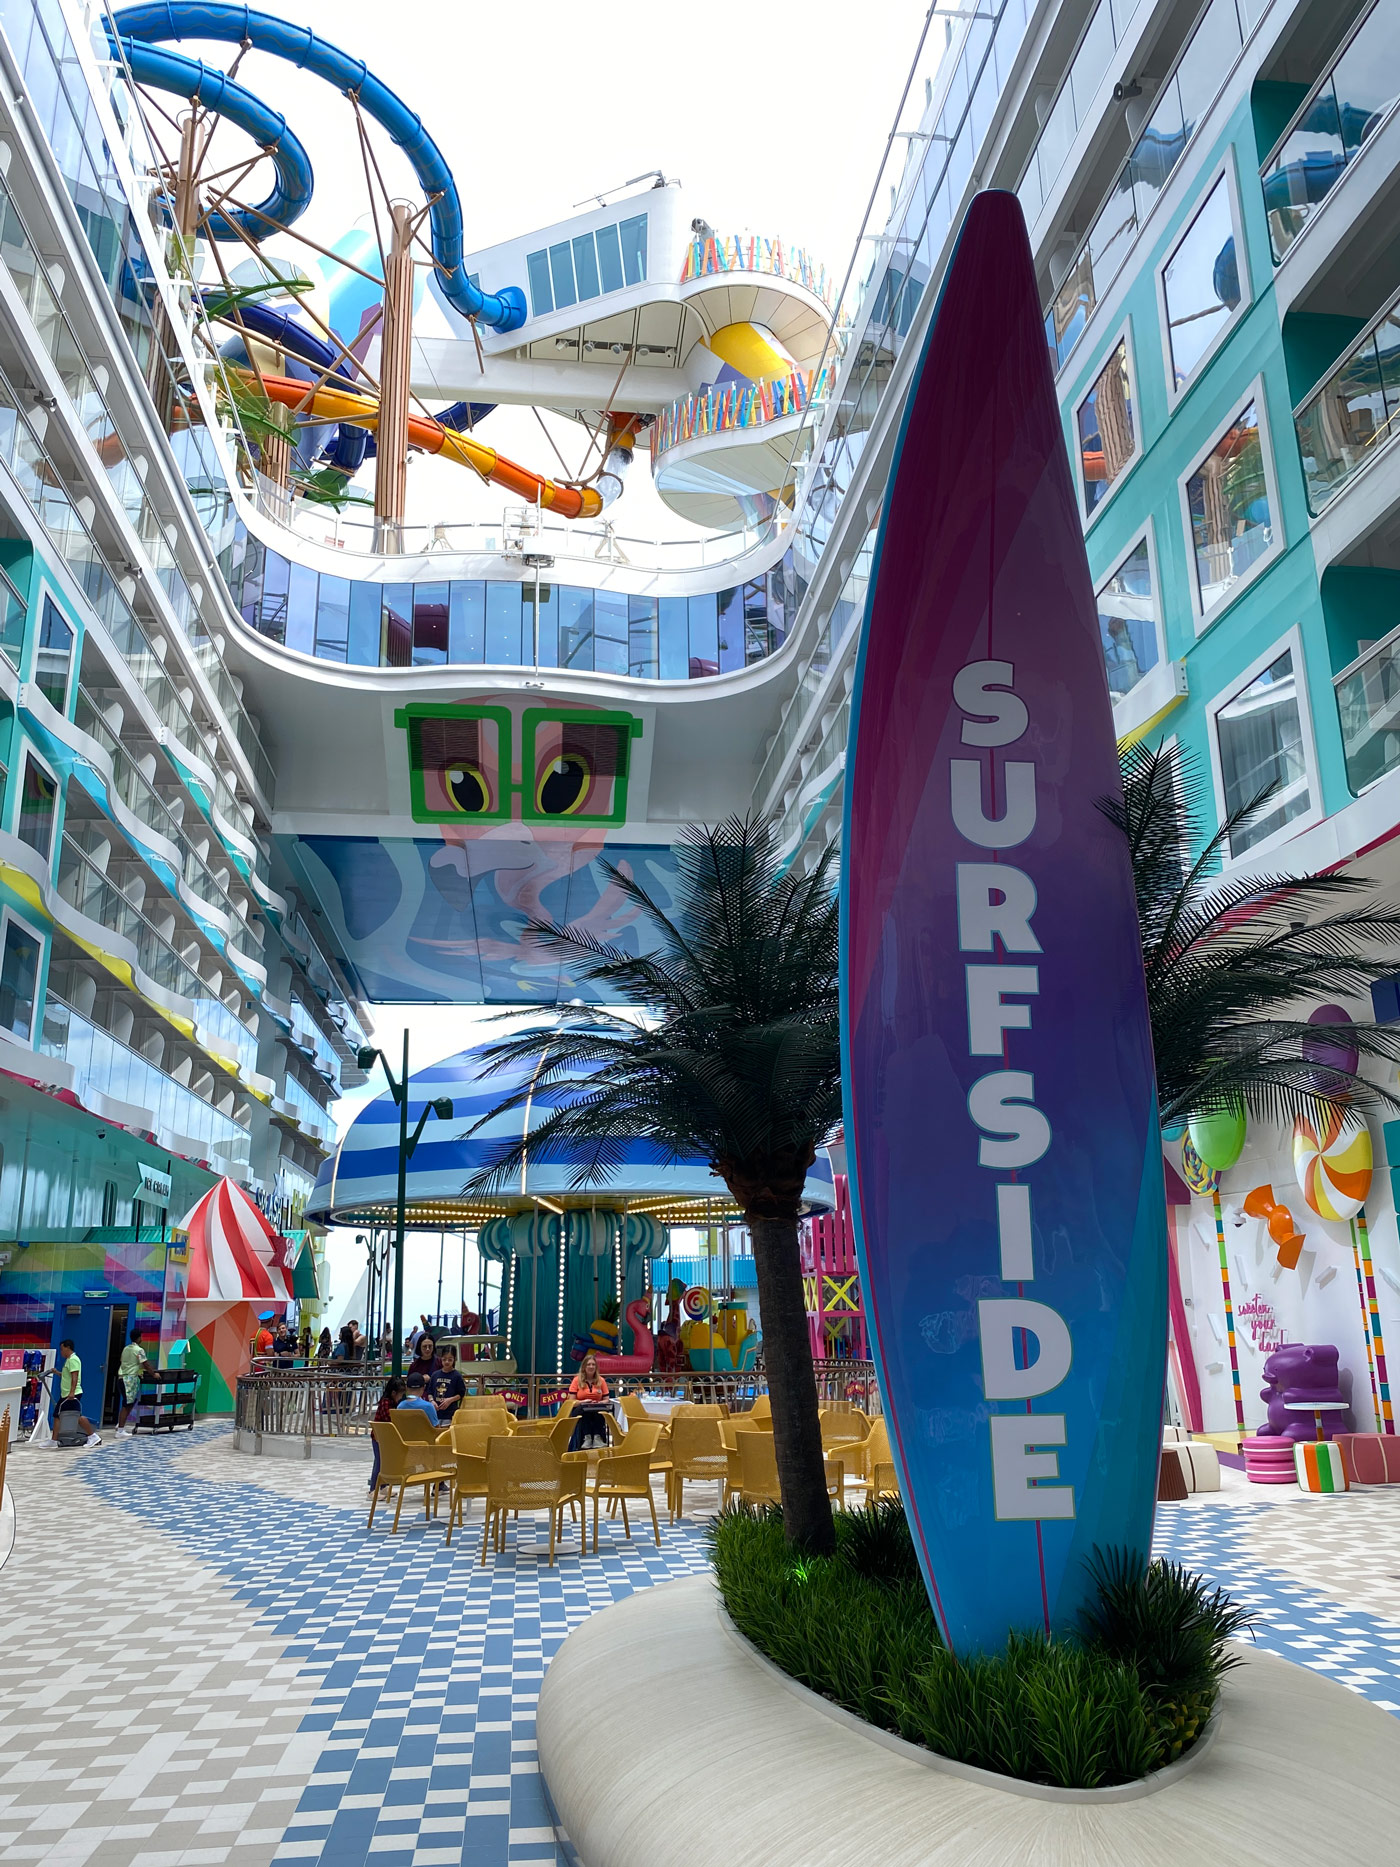 Surfside area of Royal Caribbean's Icon of the Seas